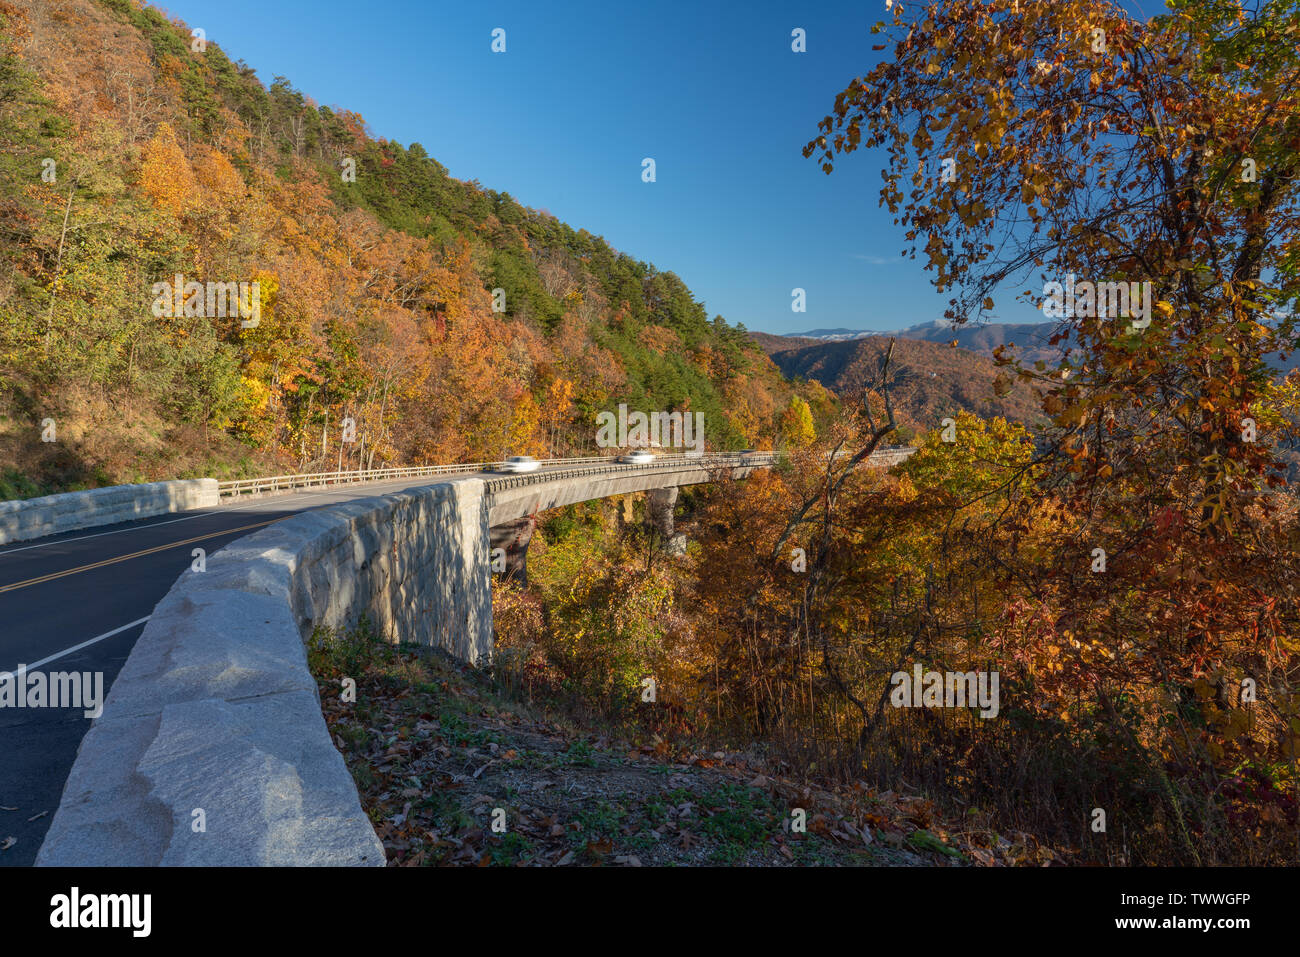 Gorgeous autumn day along the Foothills Parkway in Wears Valley in the Great Smoky Mountain National Park. Stock Photo